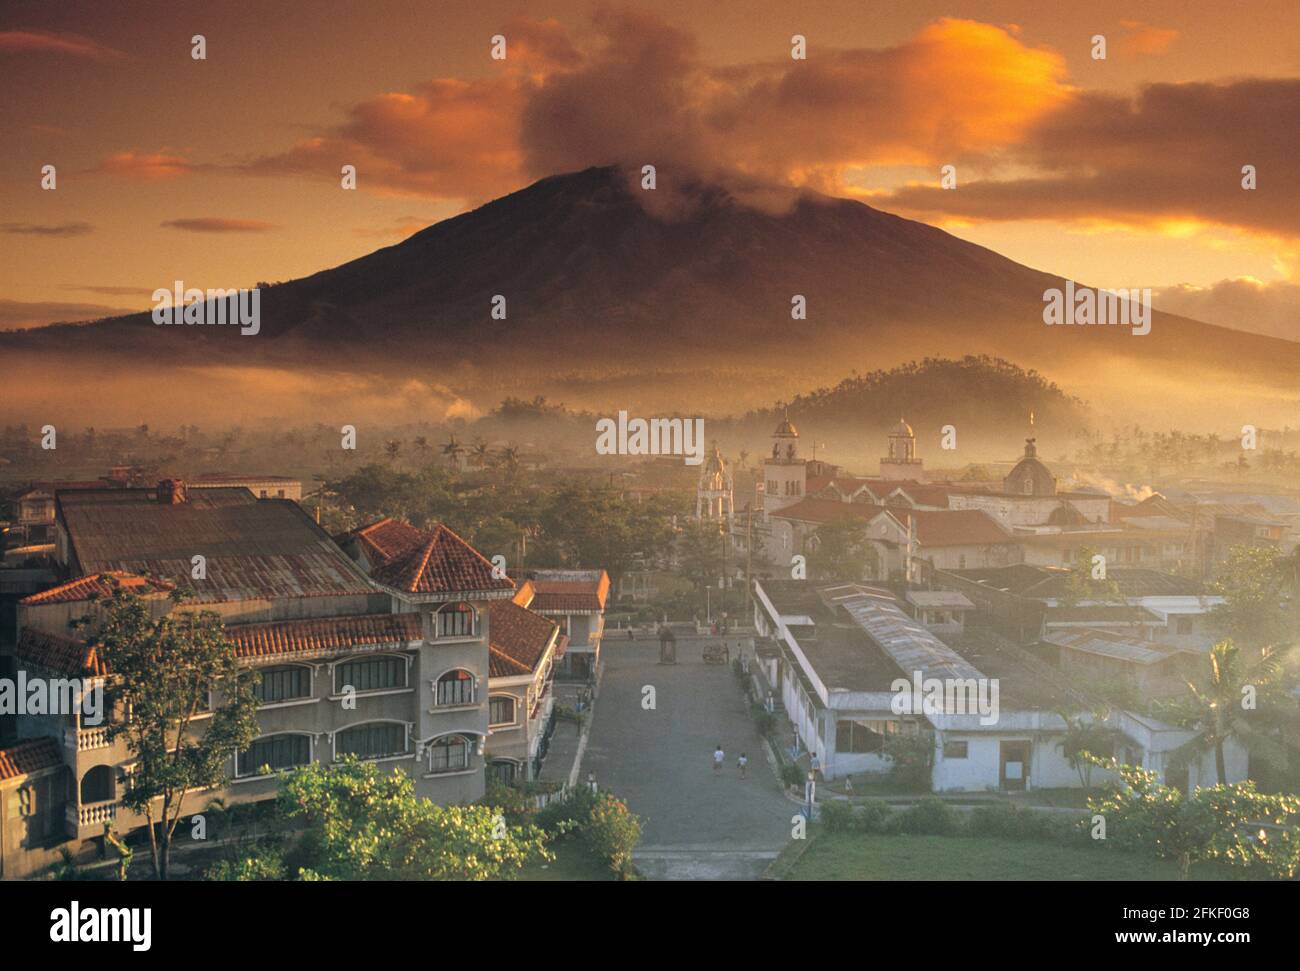 Philippines. Luzon Island. Early morning view of volcano and Spanish colonial buildings. Stock Photo